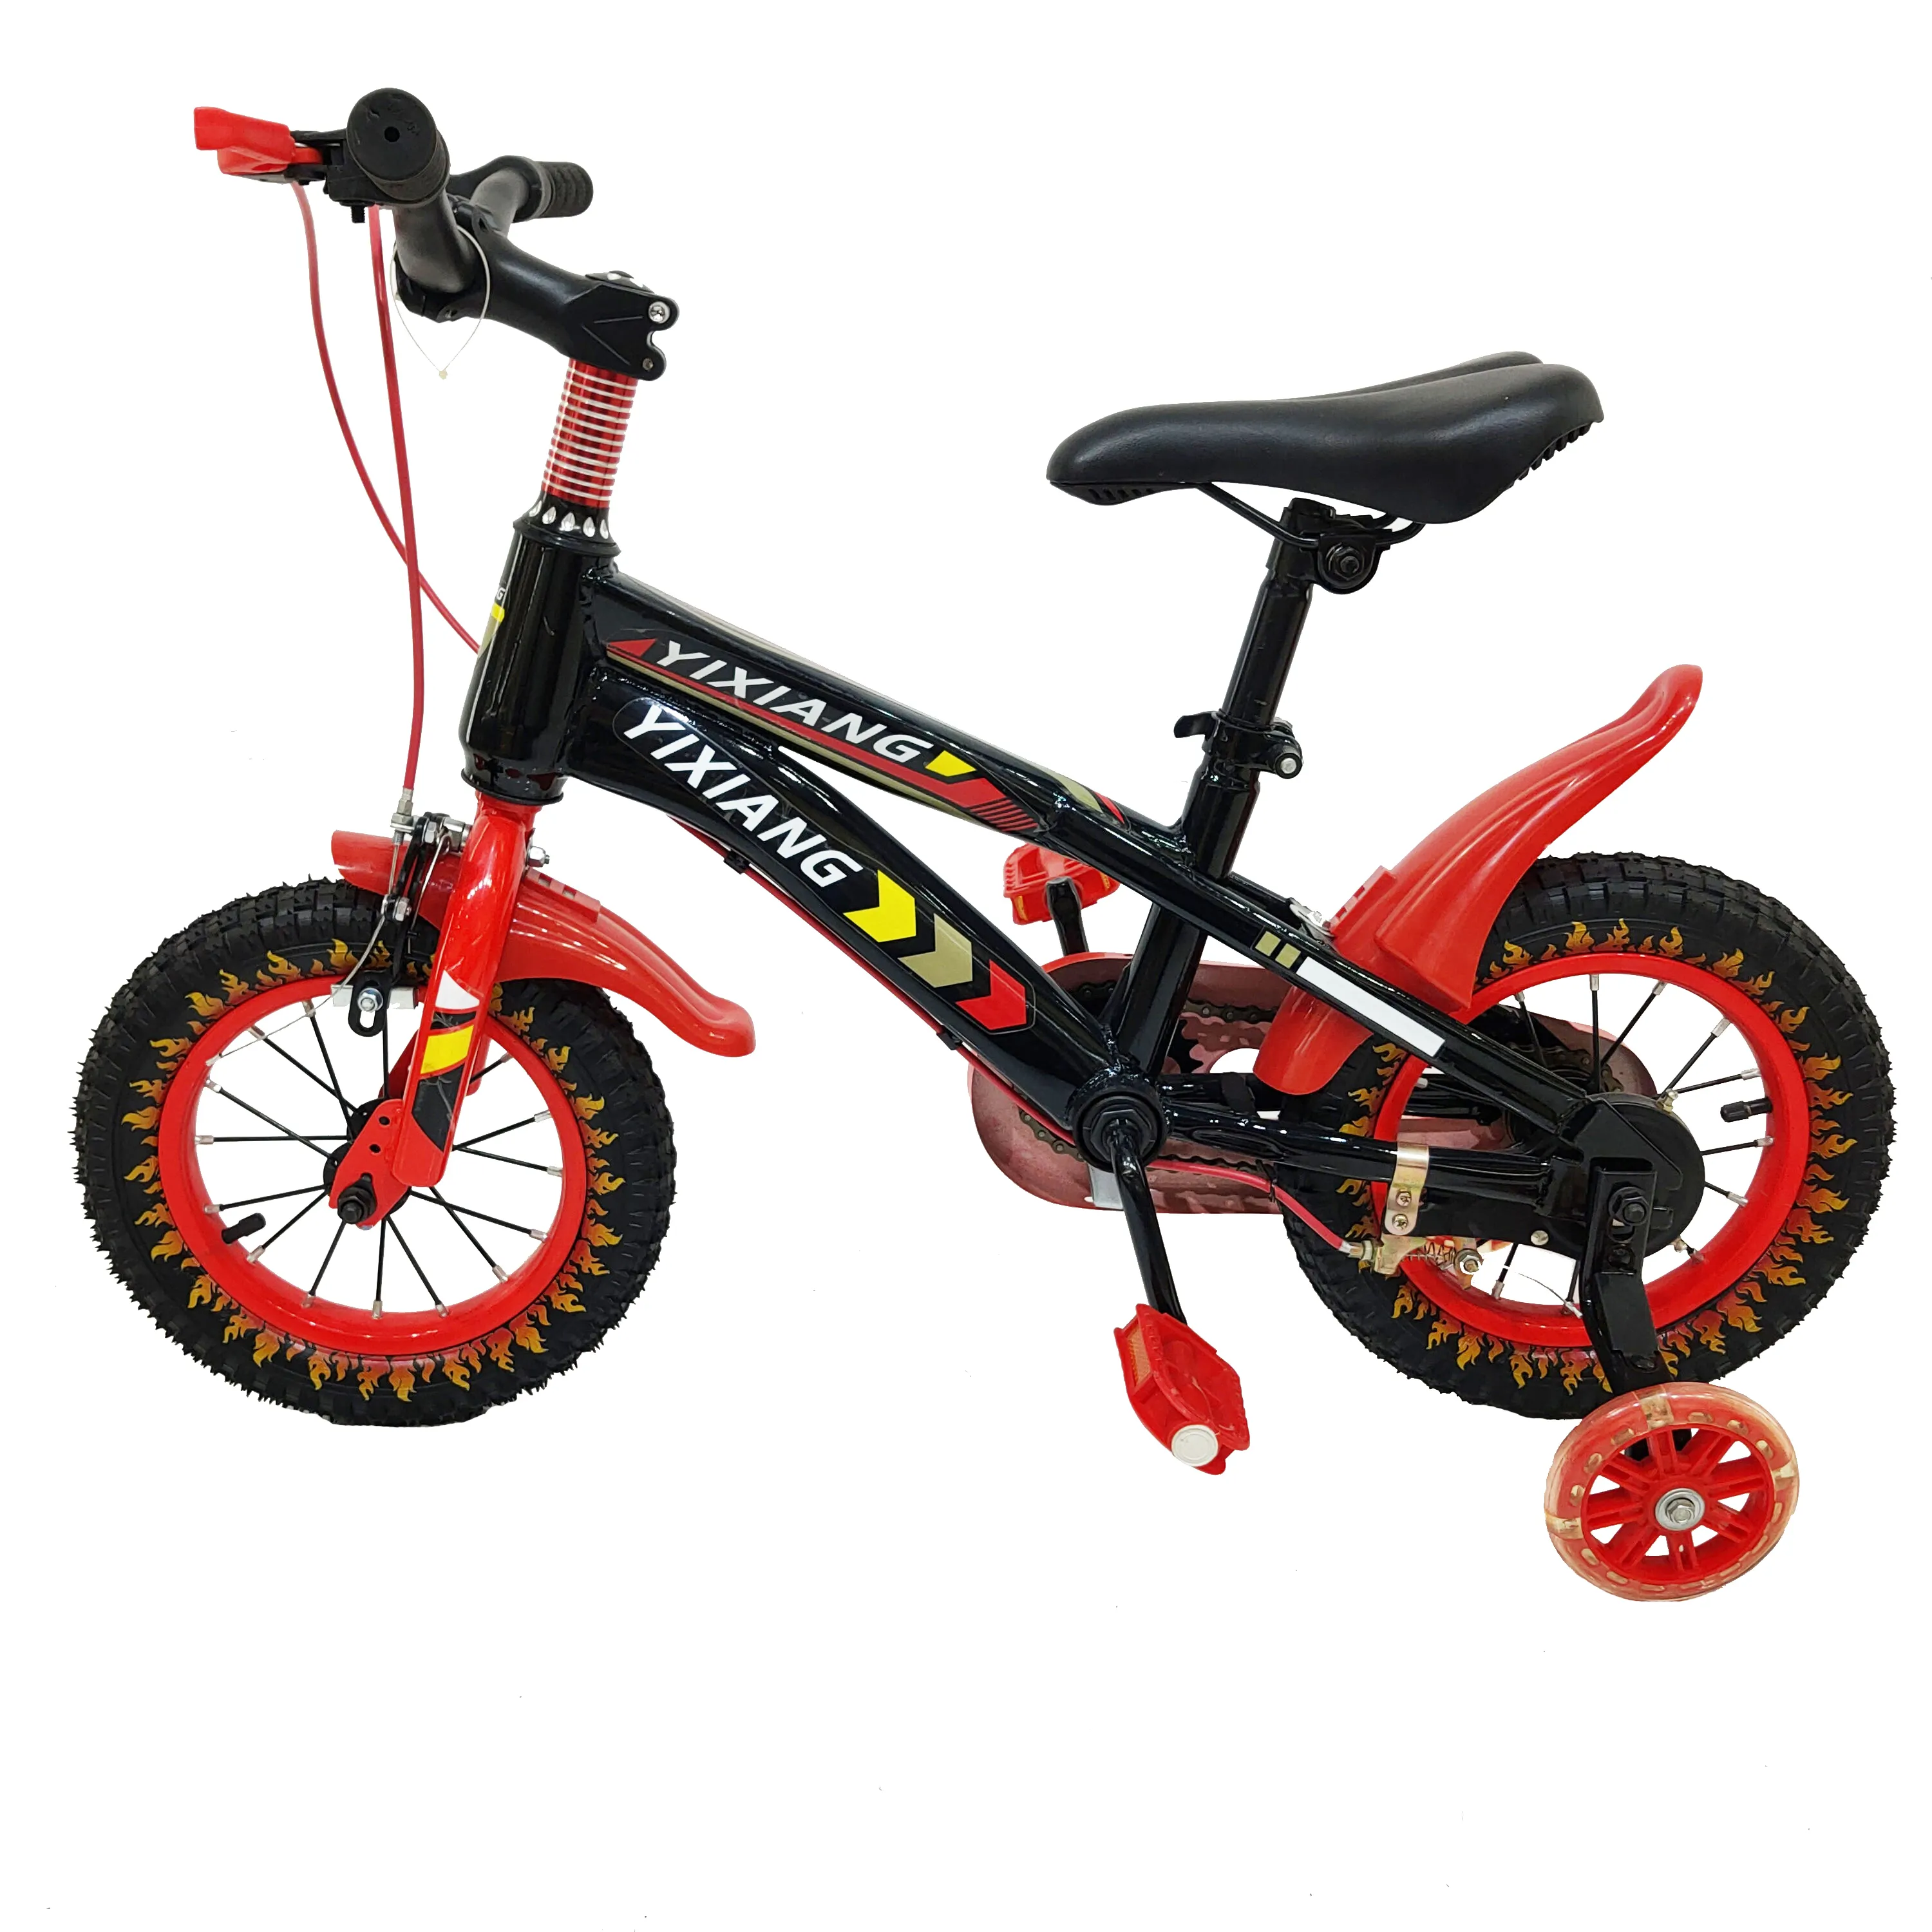 China Kids Bicycle with Steel Fork Ordinary Pedal & Single Speed Gears Balanced Riding for Youngsters